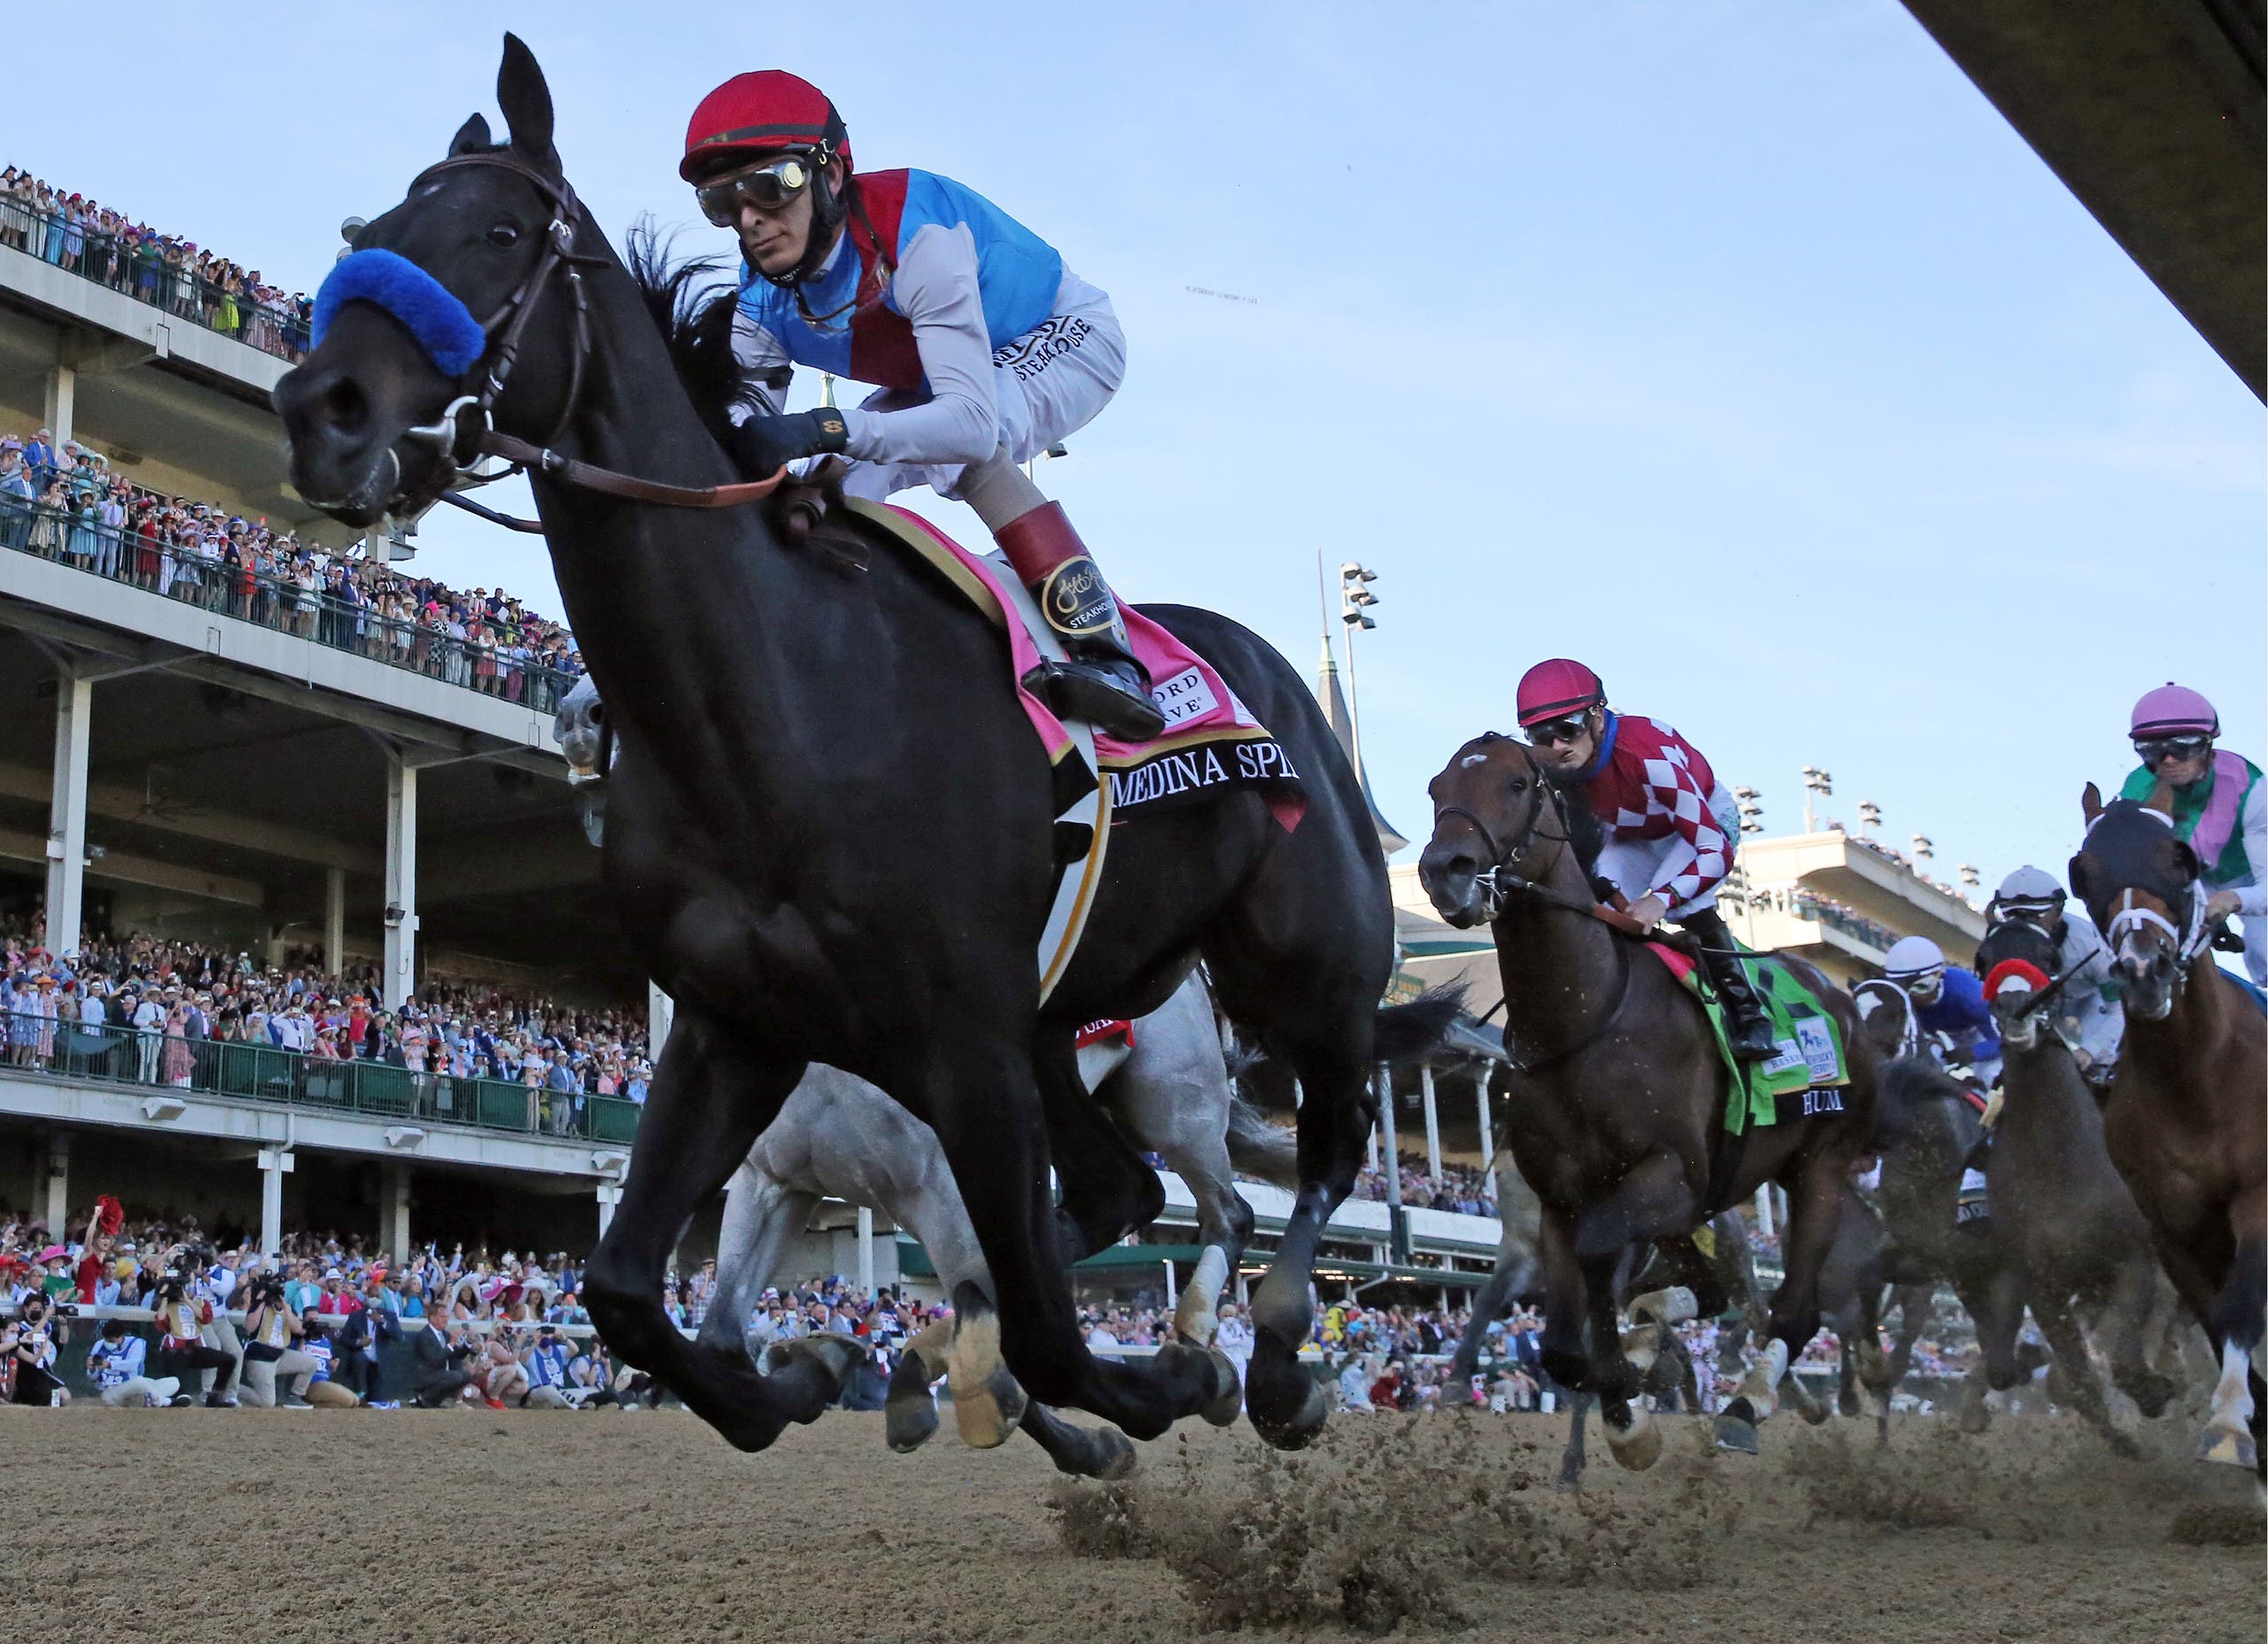 John Velazquez guides Medina Spirit to the front of the pack during 147th running of the Kentucky Derby at Churchill Downs. (Reuters)